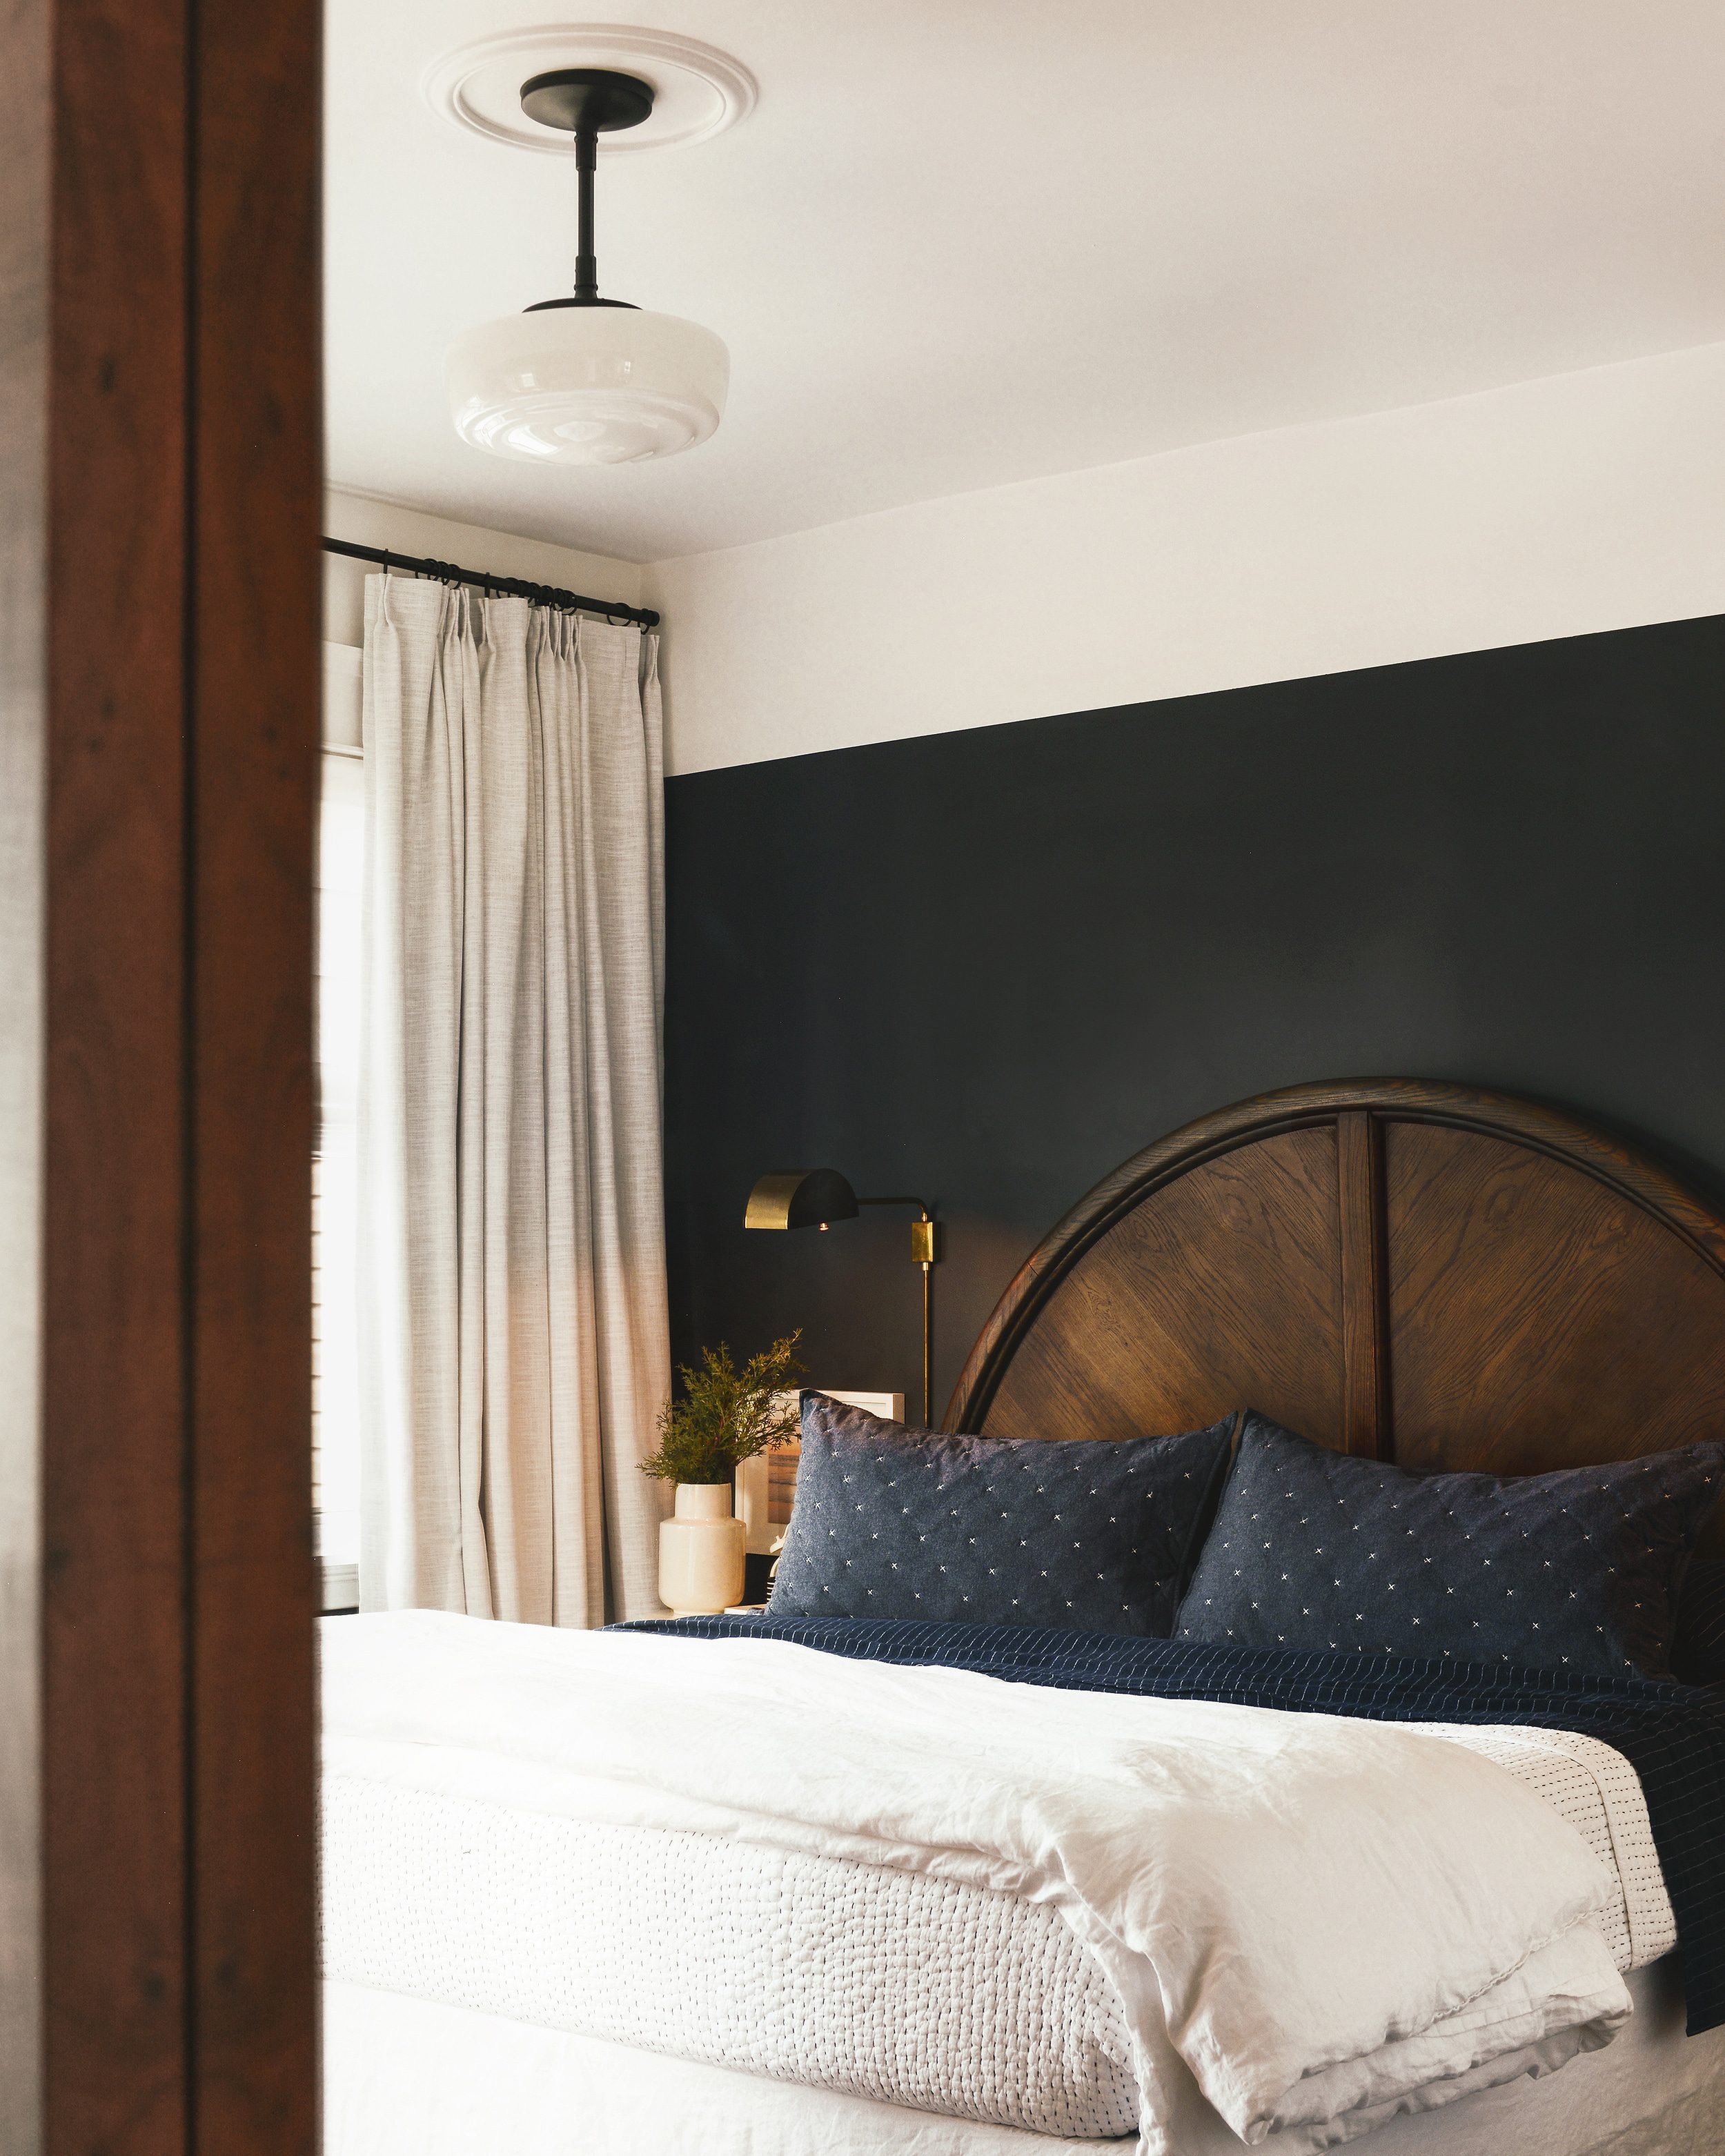 A bedroom with black walls, navy bedding and a round wooden headboard | via Yellow Brick Home